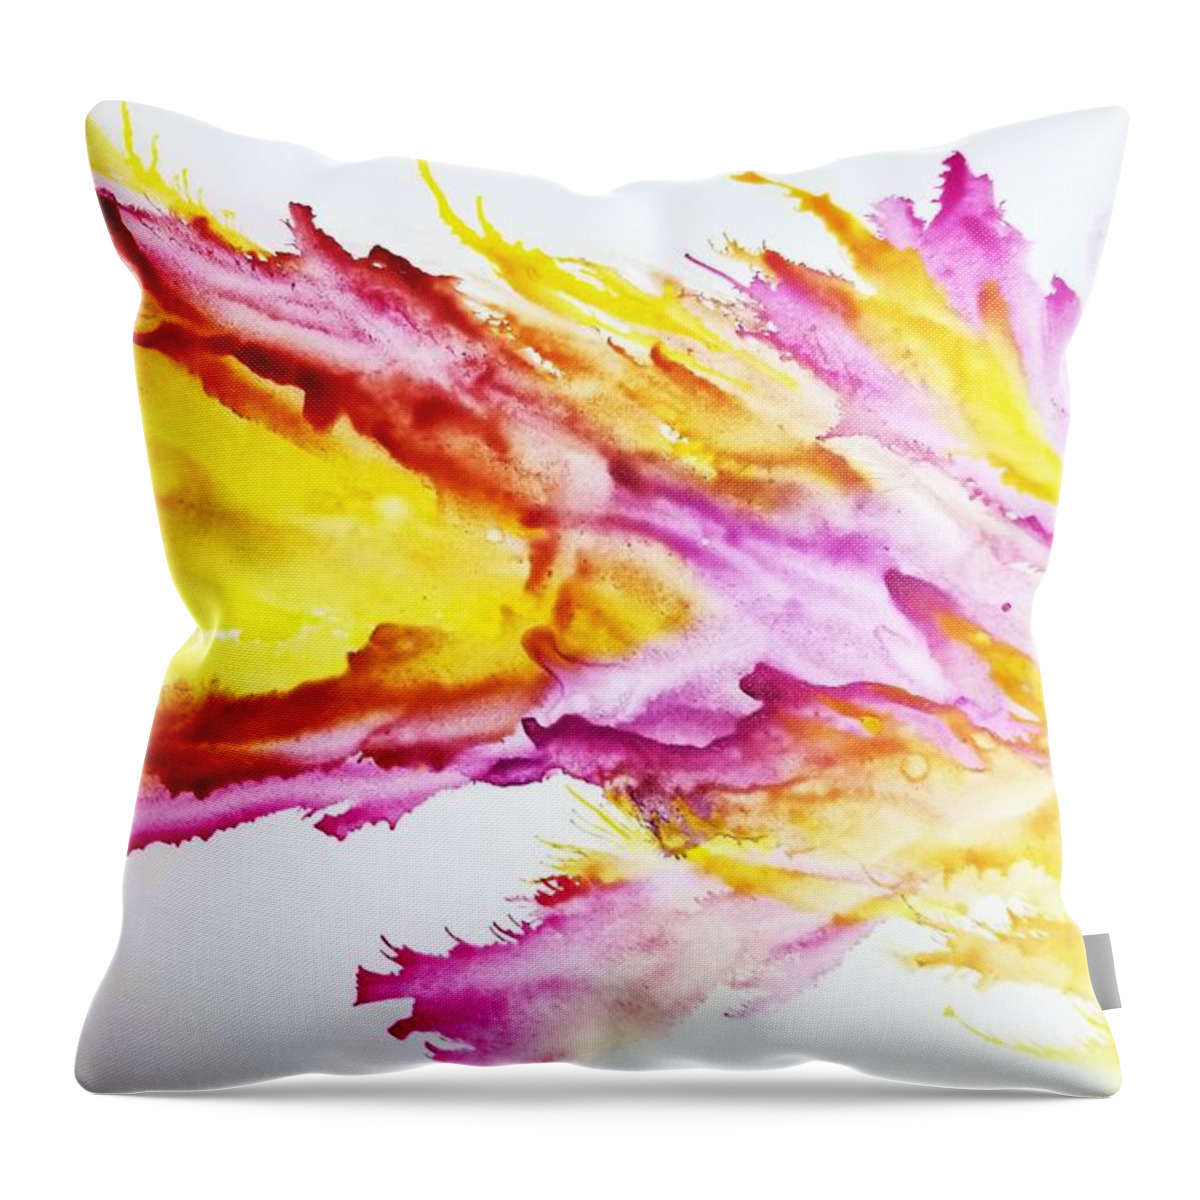 Fire Dragon Ethereal Mystical Purple Pink Yellow Red Orange Landscape Fantasy Alcohol Ink Yupo Decor Throw Pillow featuring the digital art Dragon breath by Kelly Dallas